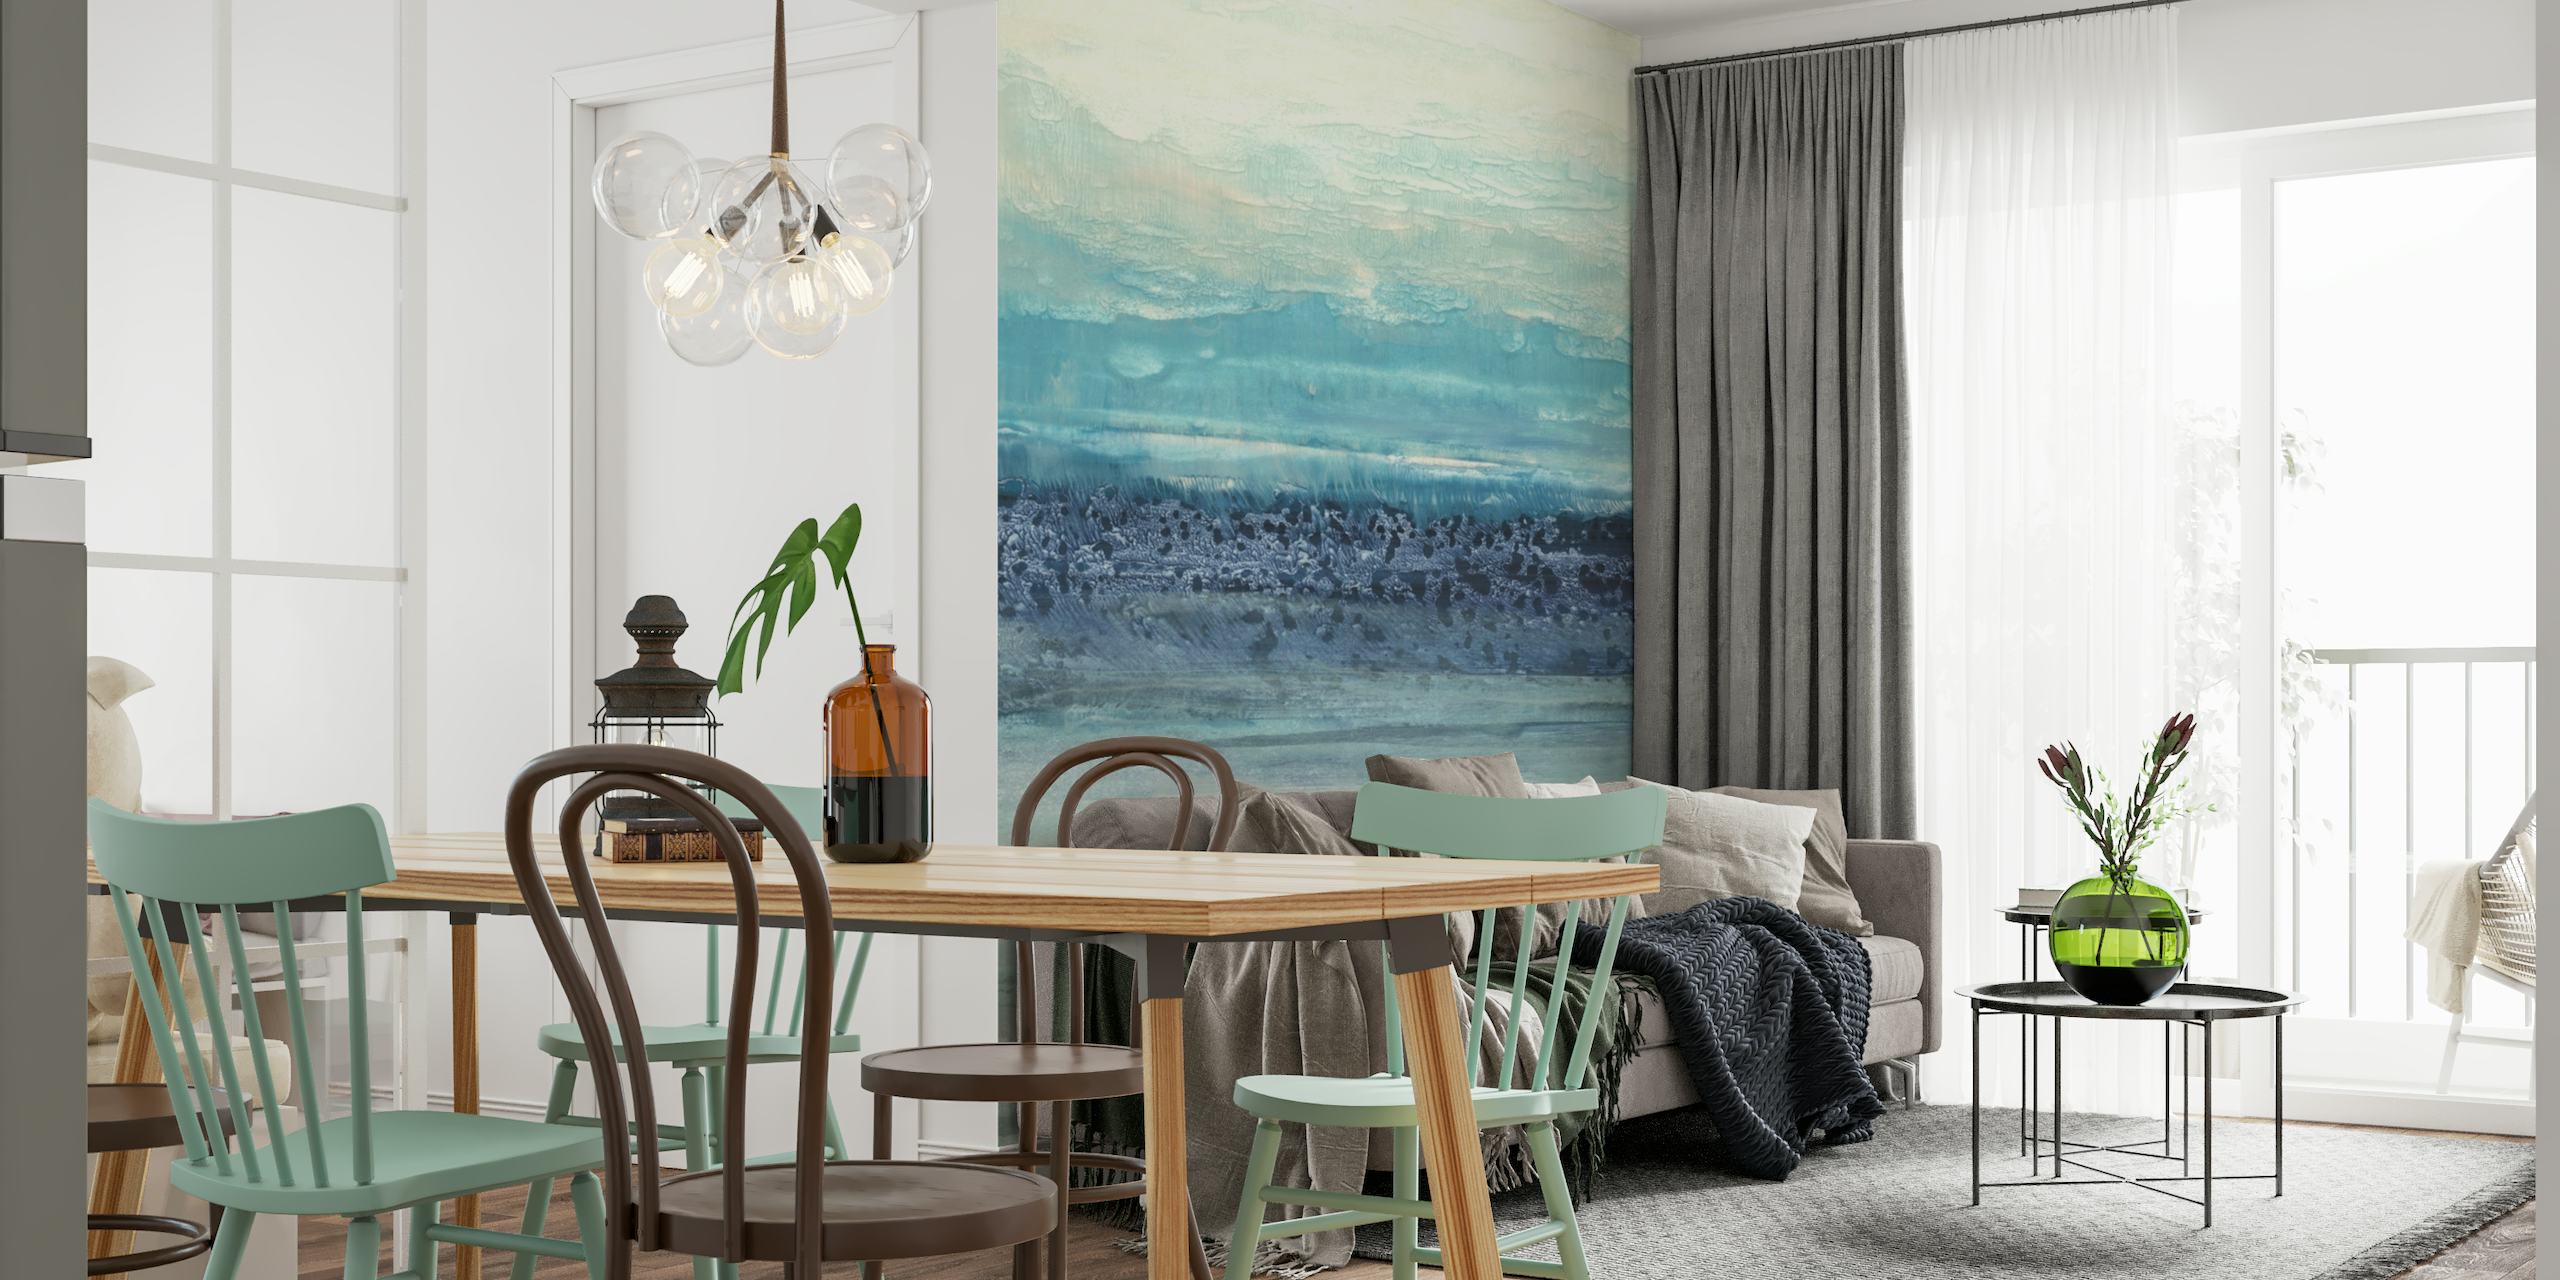 Abstract blue and gray serene wall mural resembling a misty ocean horizon.